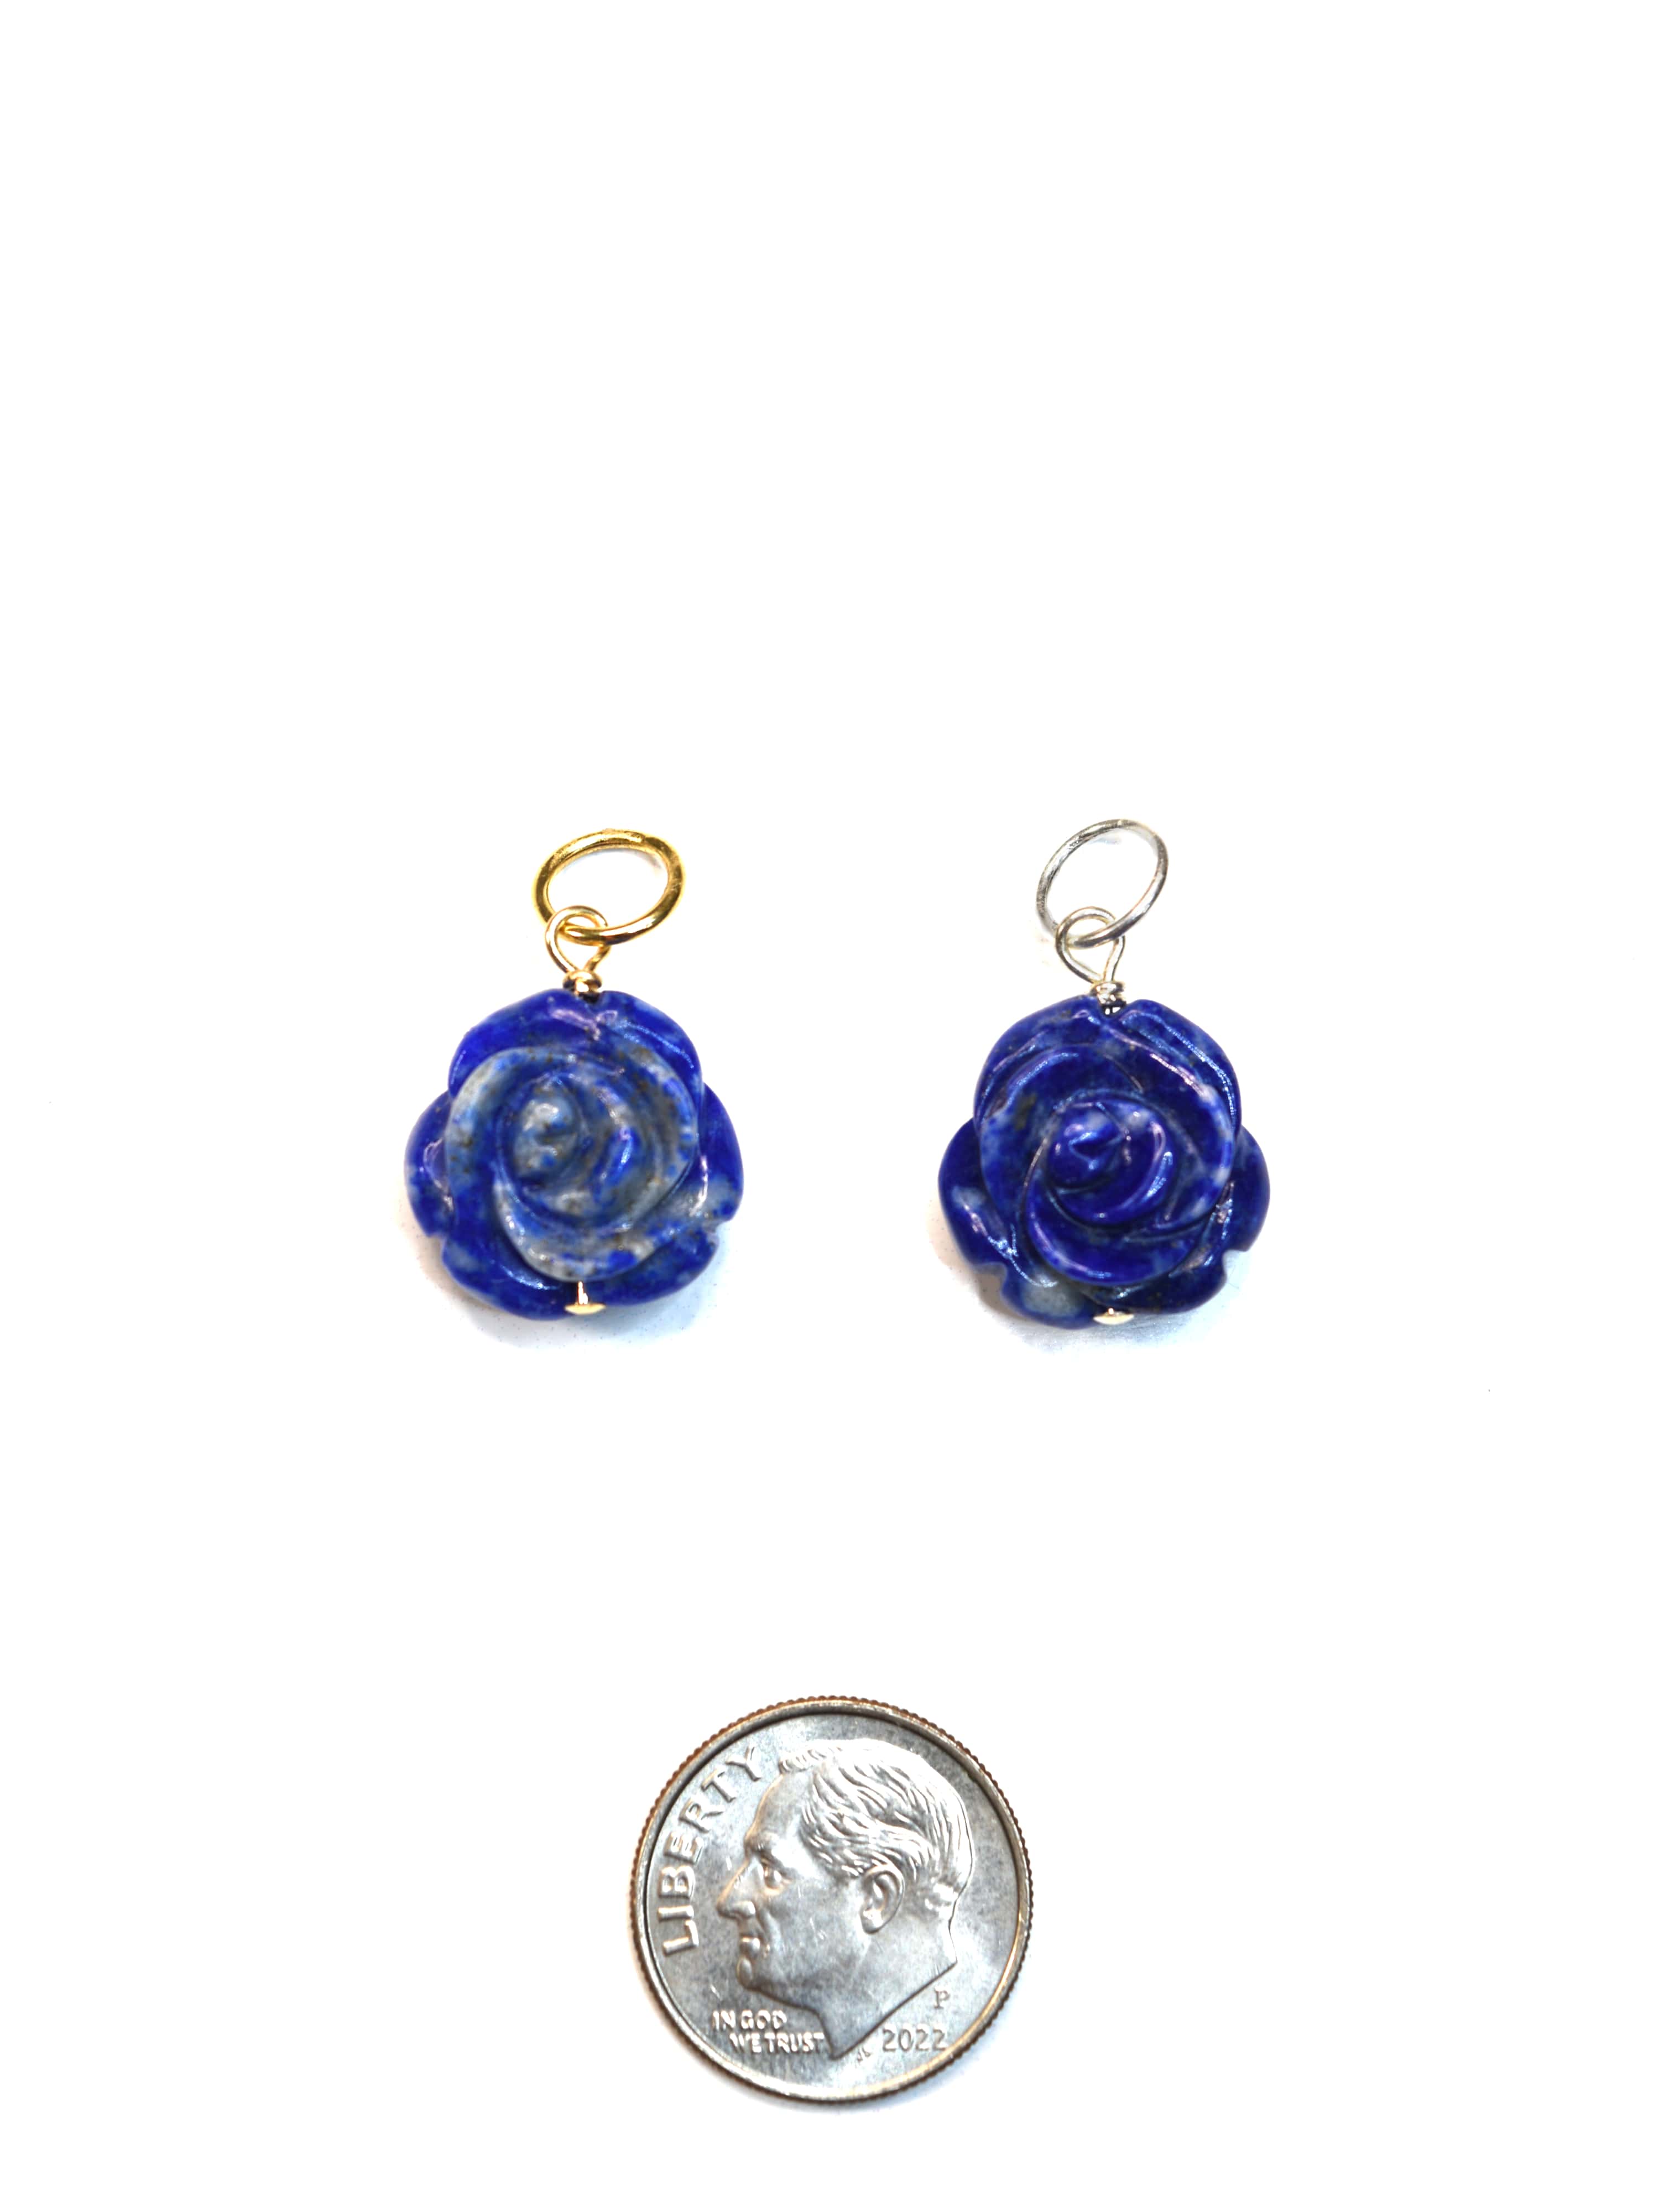 Carved Rose Charm in Lapis